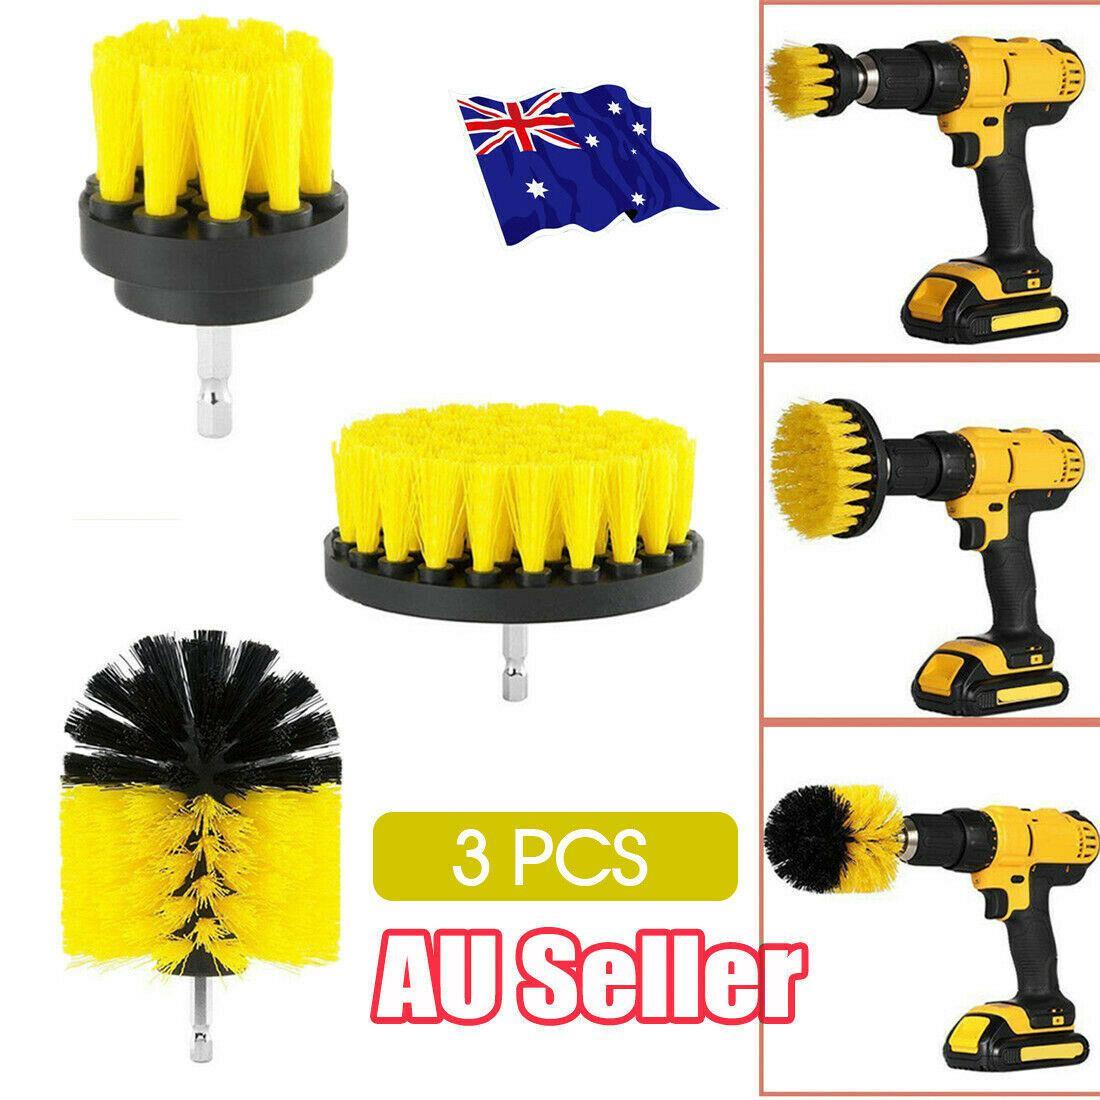 3 PCS AU Grout Power Scrubber Cleaning Drill Brush Tub Cleaner Combo Tool Kit Yellow